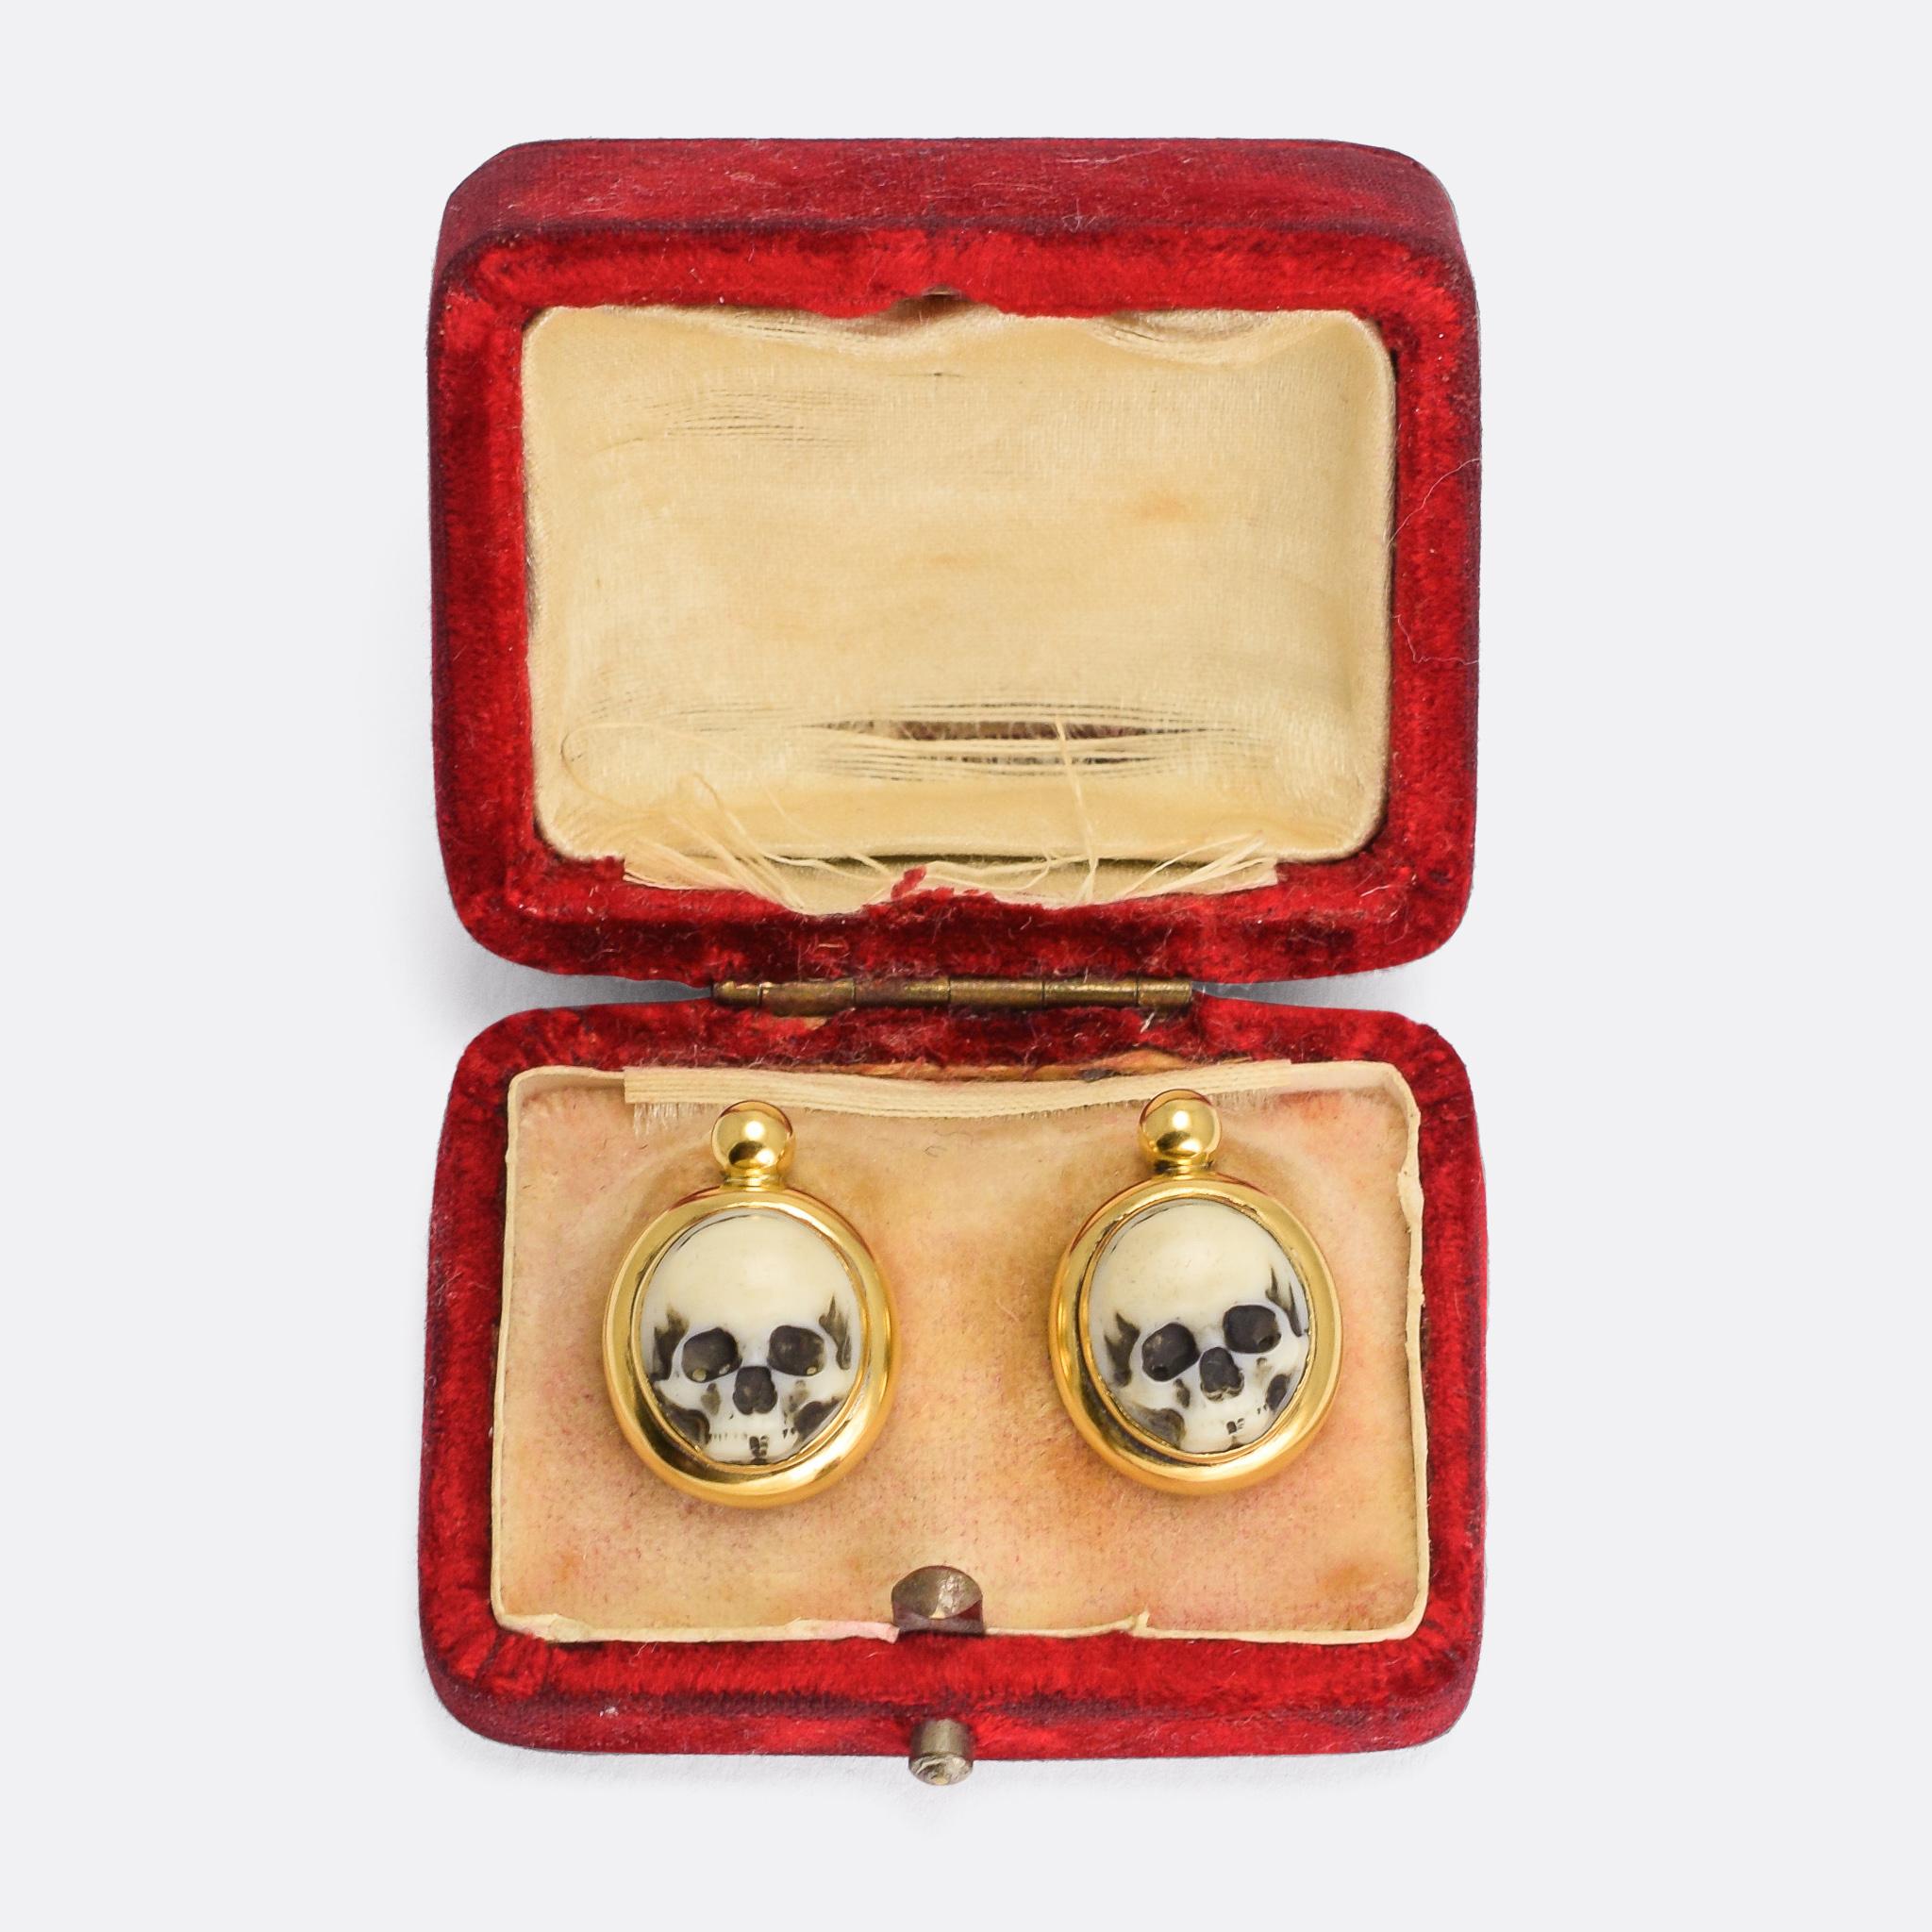 A particularly cool pair of Memento Mori skull earrings dating from the mid-Victorian period. The skulls are formed from enamel, and mounted in 15 karat gold.

Since ancient times, people have reflected on the brevity of life: The Greek Stoic